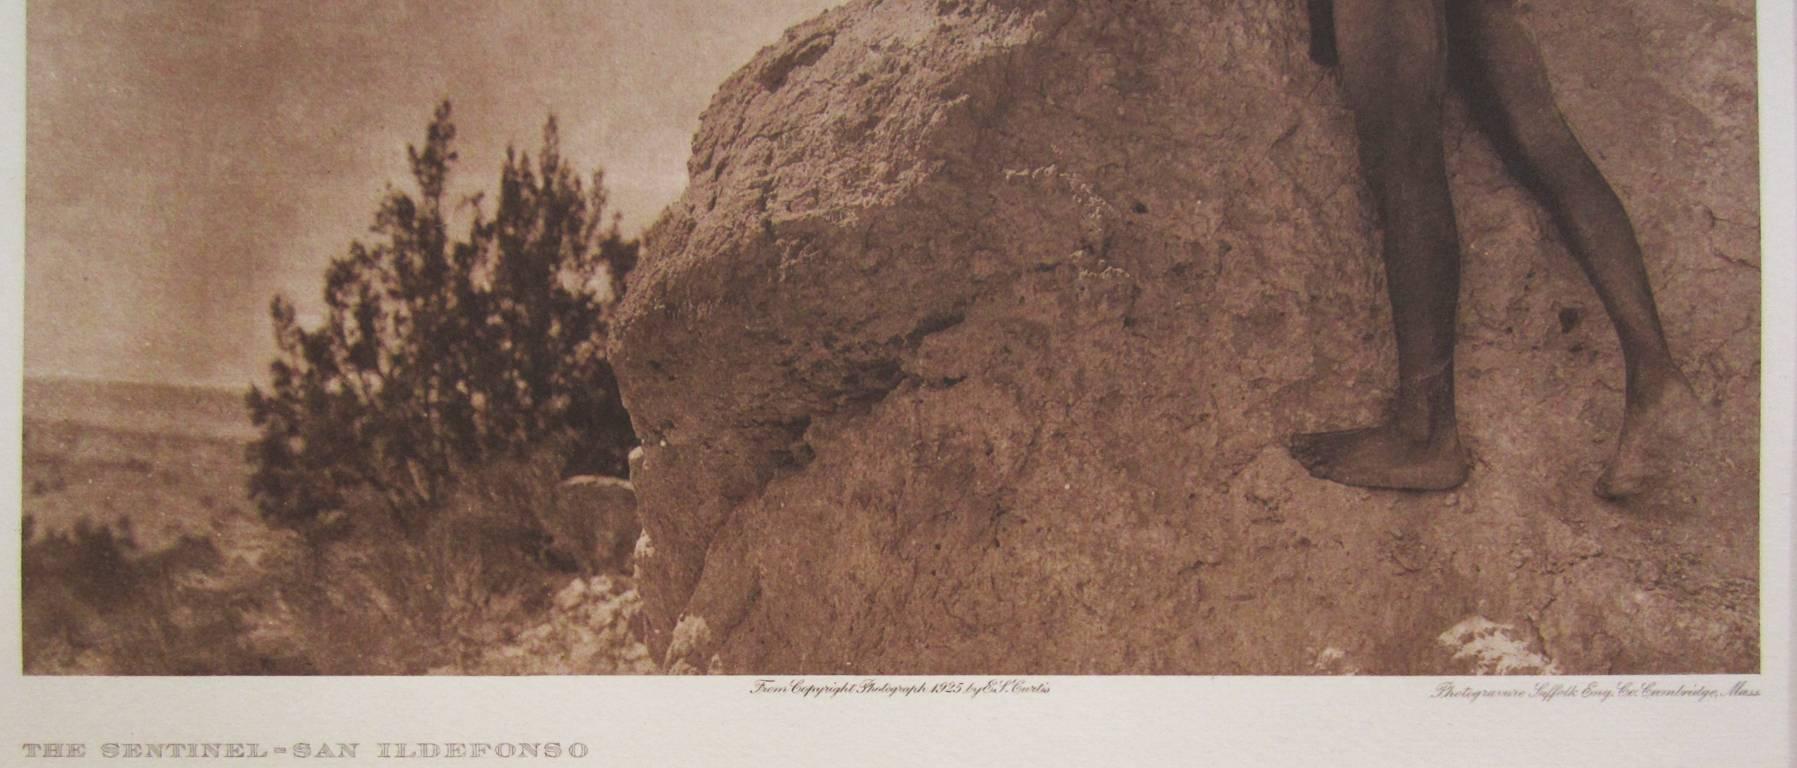 The Sentinel - San Ildefonso, pl. 580 - Photograph by Edward S. Curtis